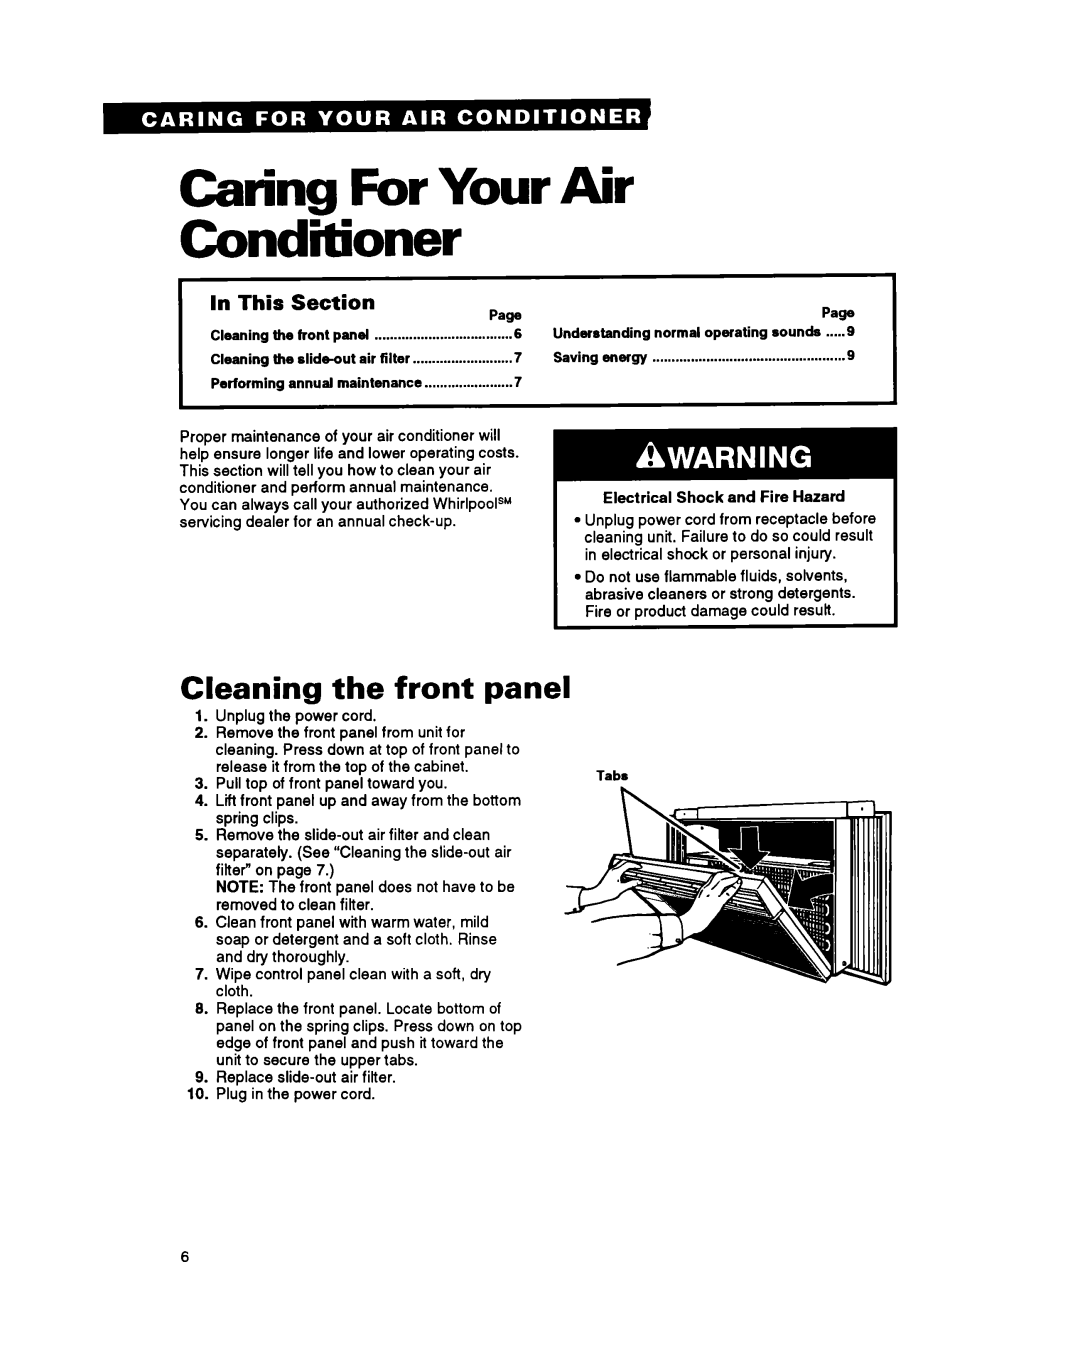 Whirlpool ACM052 warranty Caring For Your Air Conditioner, Cleaning the front panel, PageI, I In This Section 